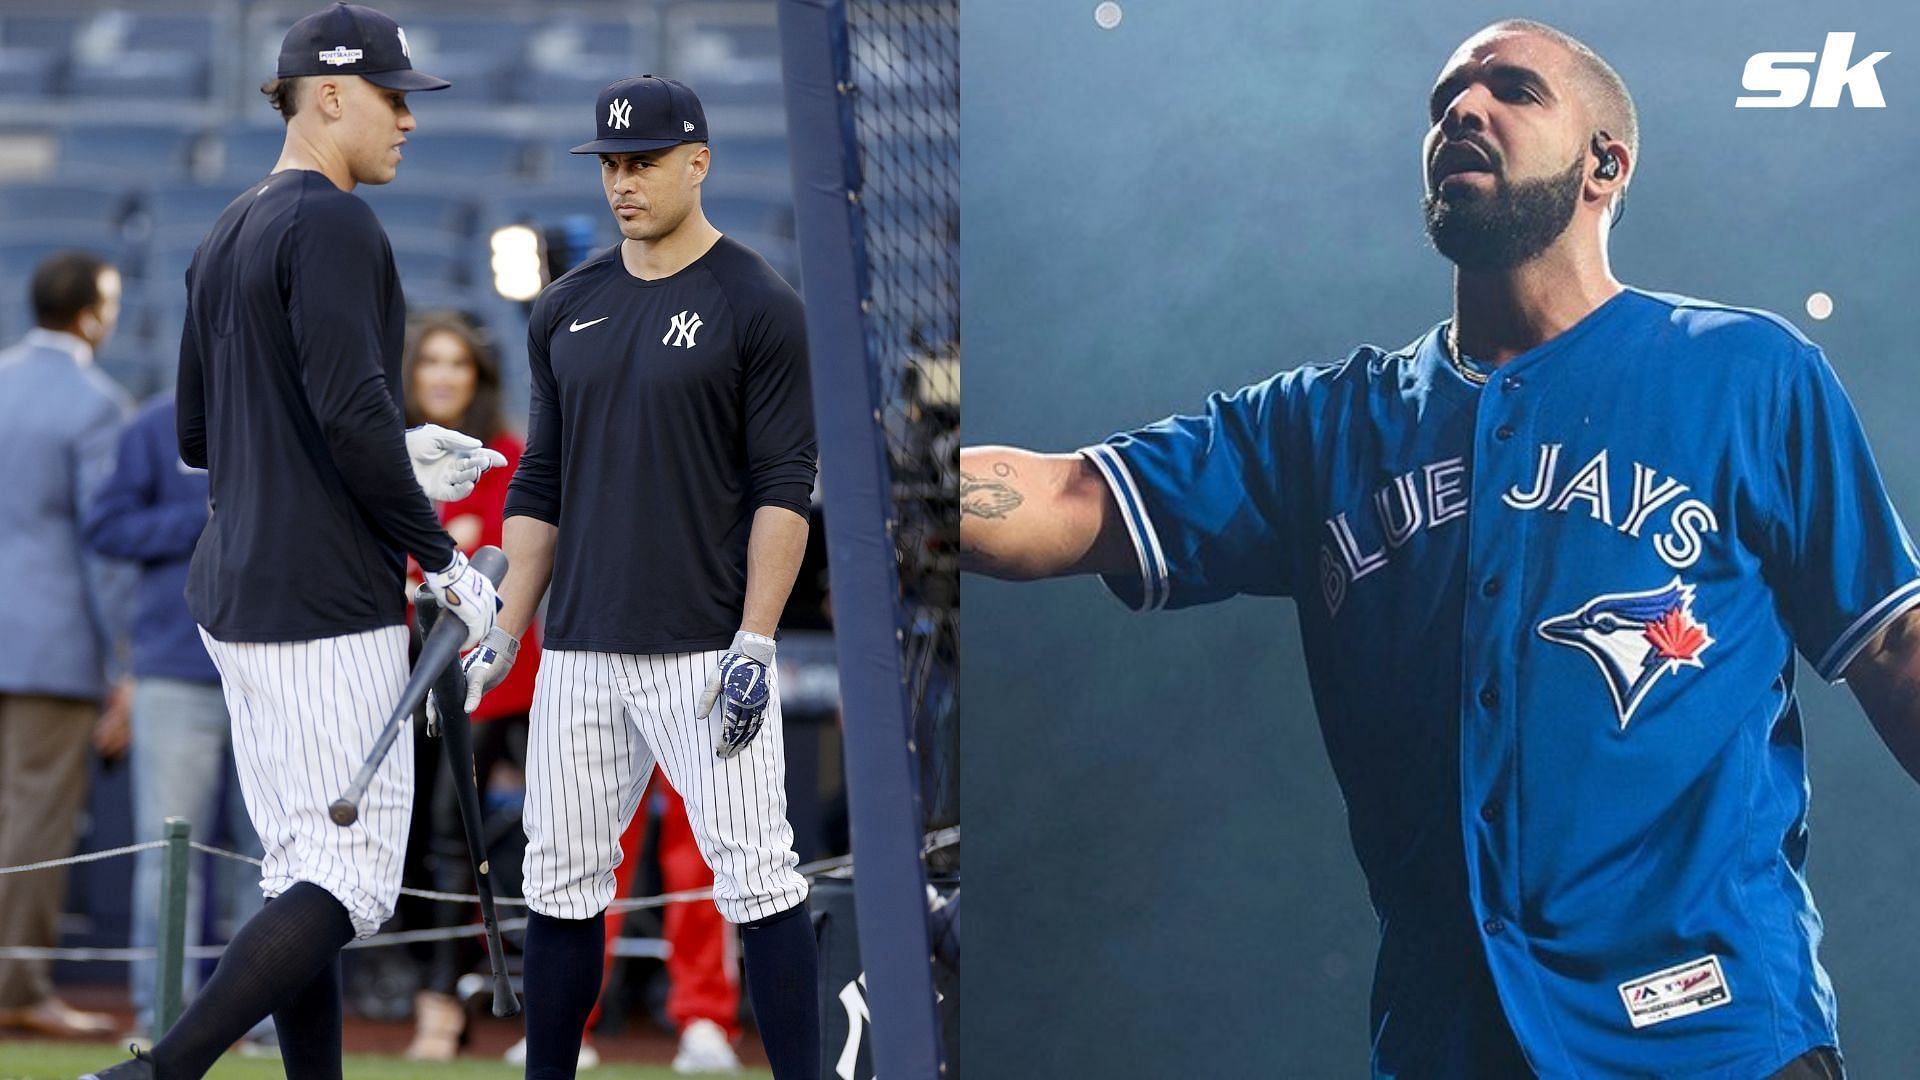 Drake provoked the ire of his hometown team for appearing alongside some New York Yankees players